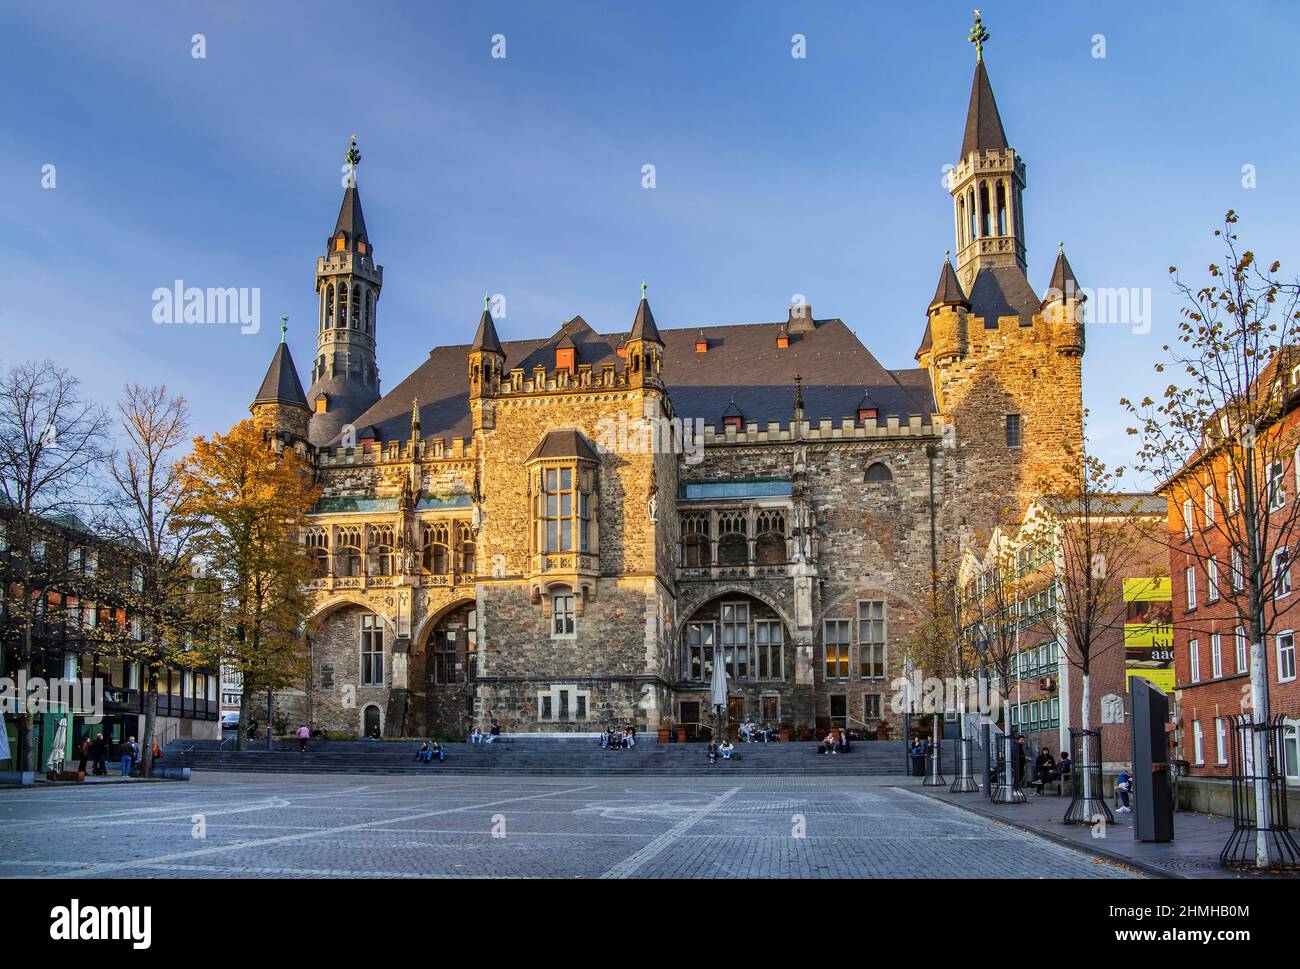 Katschhof with south view from the Gothic town hall in the evening light, Aachen, North Rhine-Westphalia, Germany Stock Photo